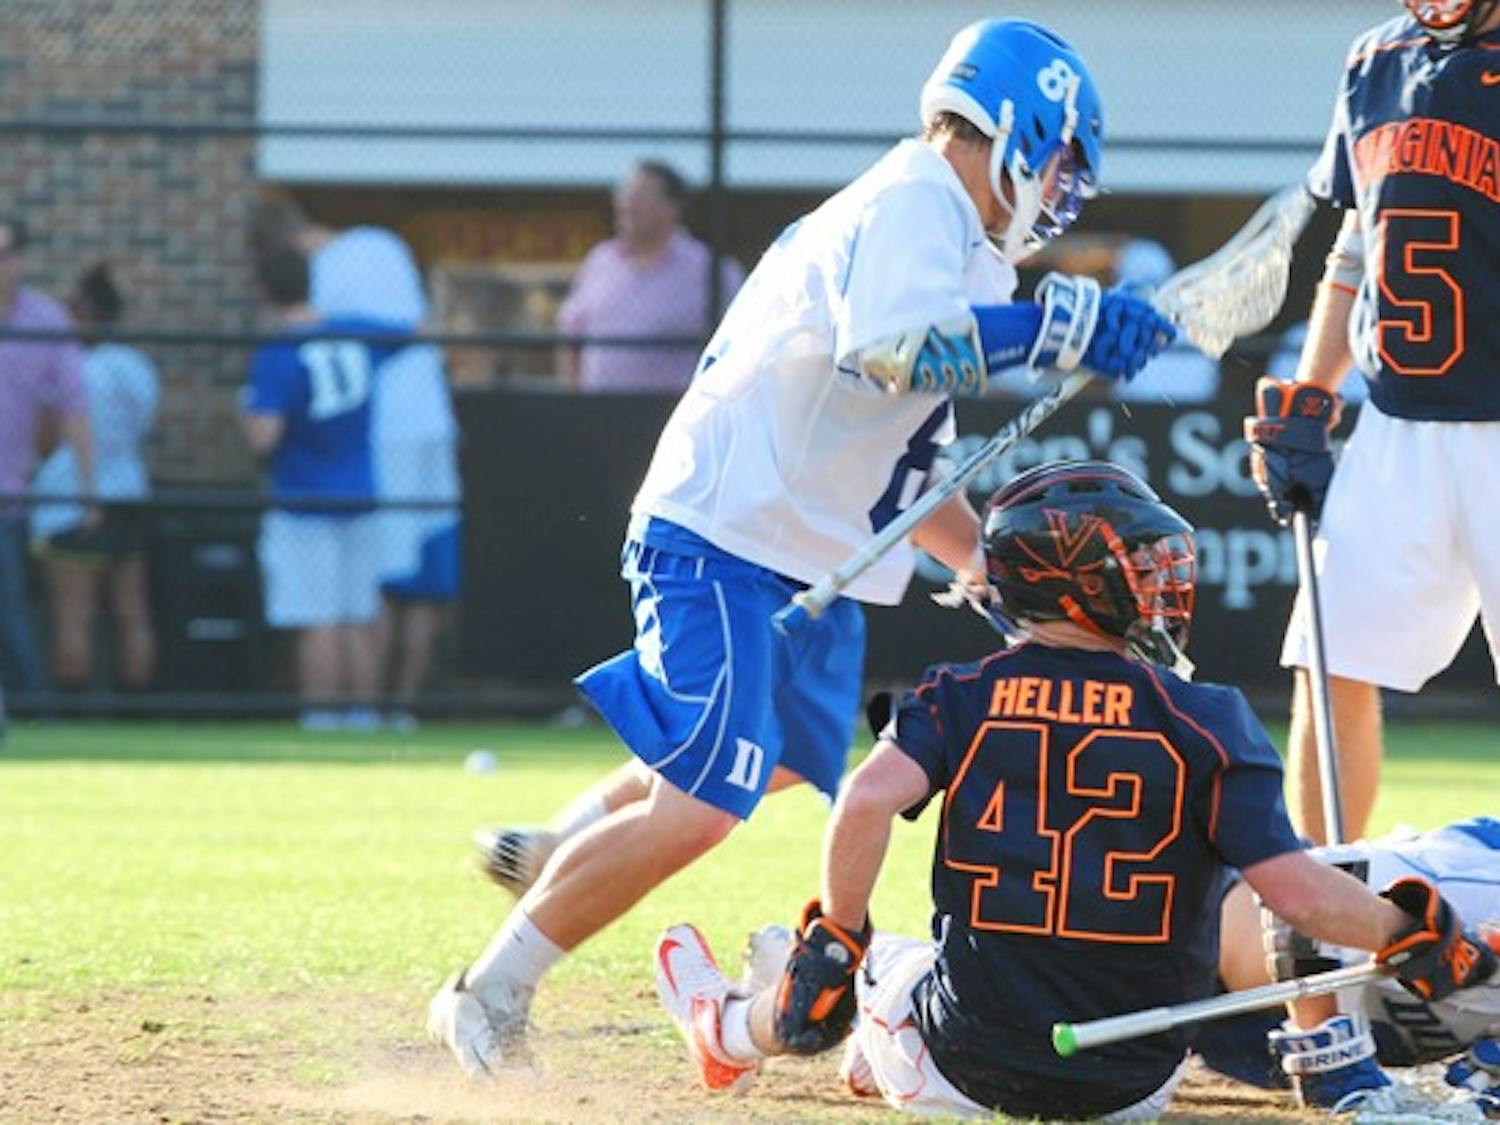 Junior Josh Dionne’s five goals led the Blue Devils to victory in a high-scoring contest.